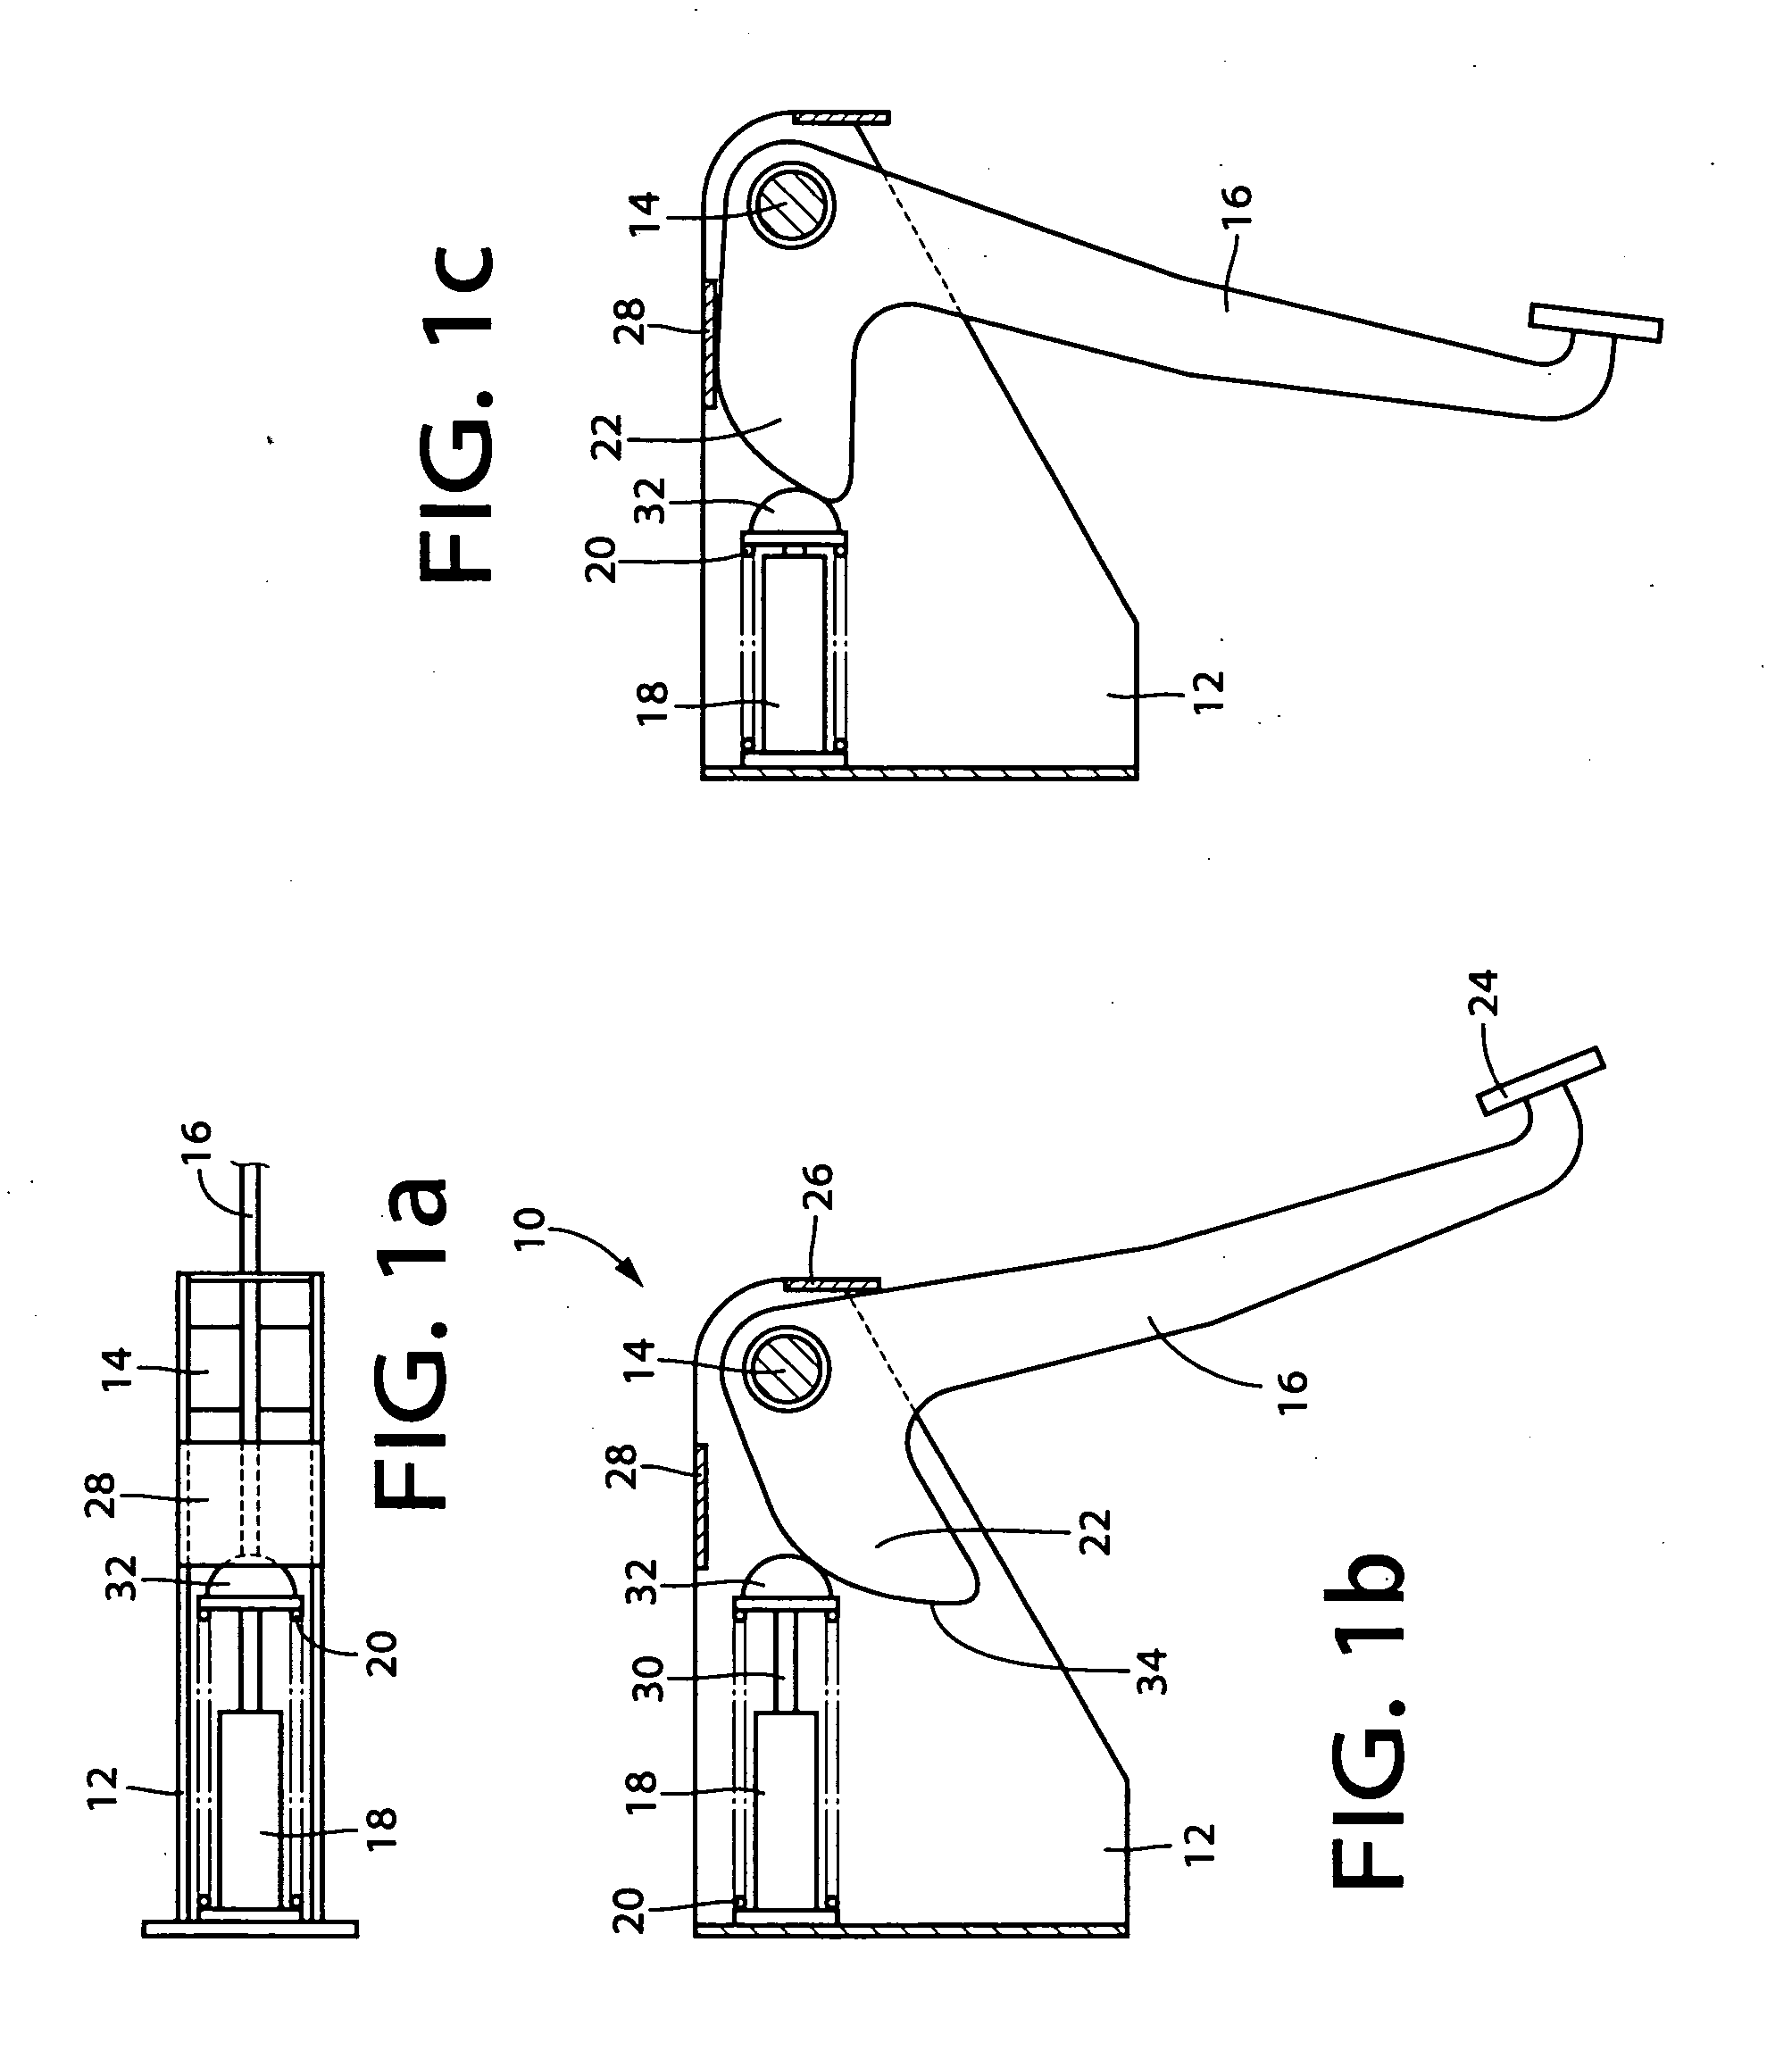 Pedal reaction force device